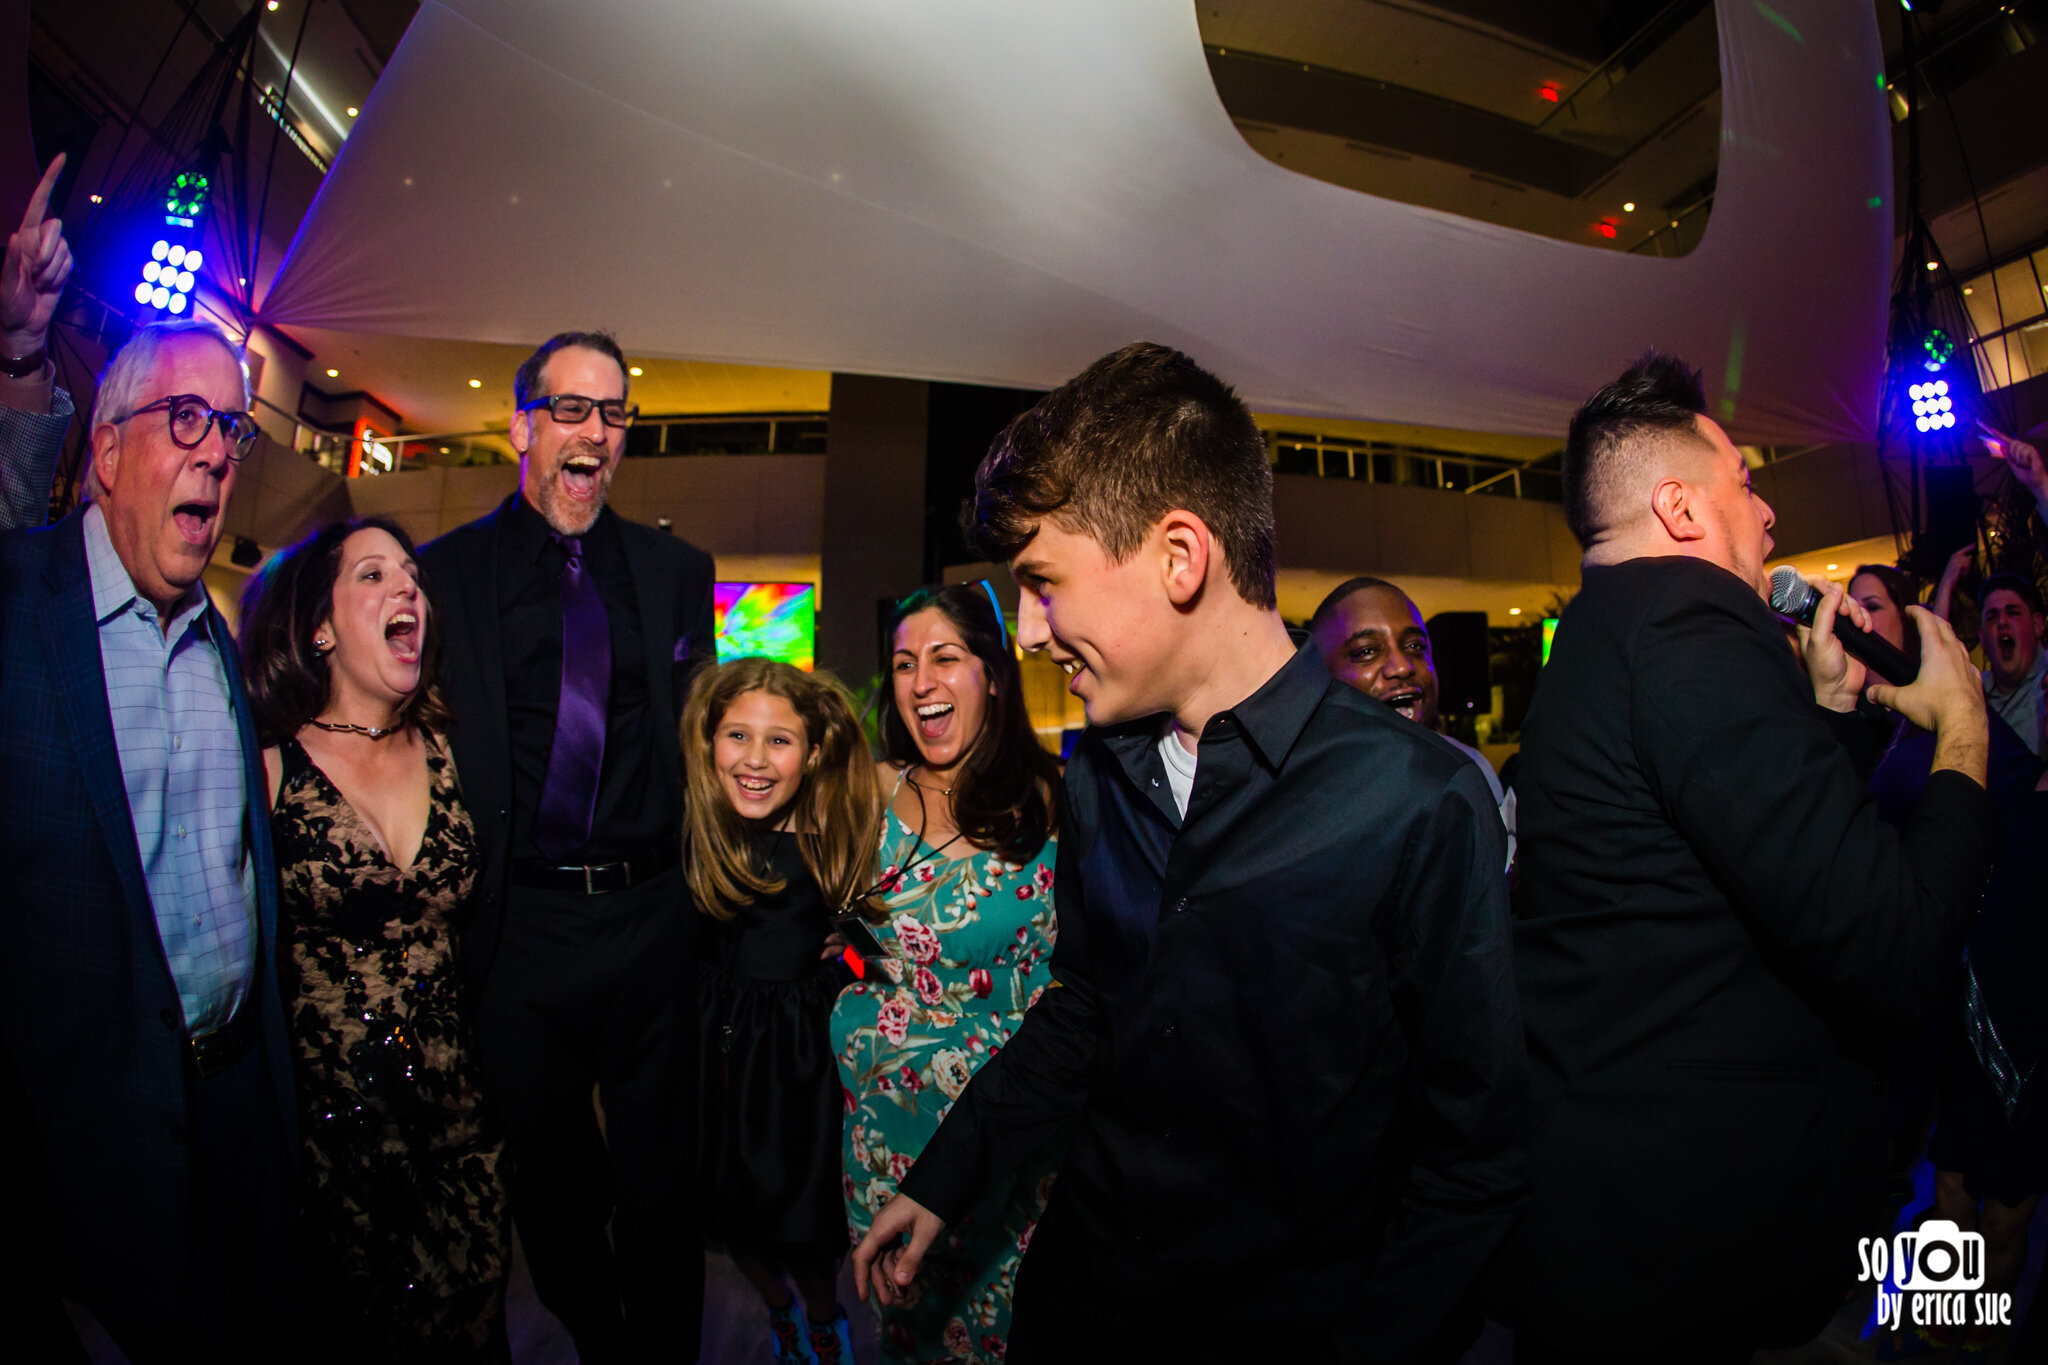 75-so-you-by-erica-sue-bar-mitzvah-photographer-boca-pavilion-grille-4171.JPG